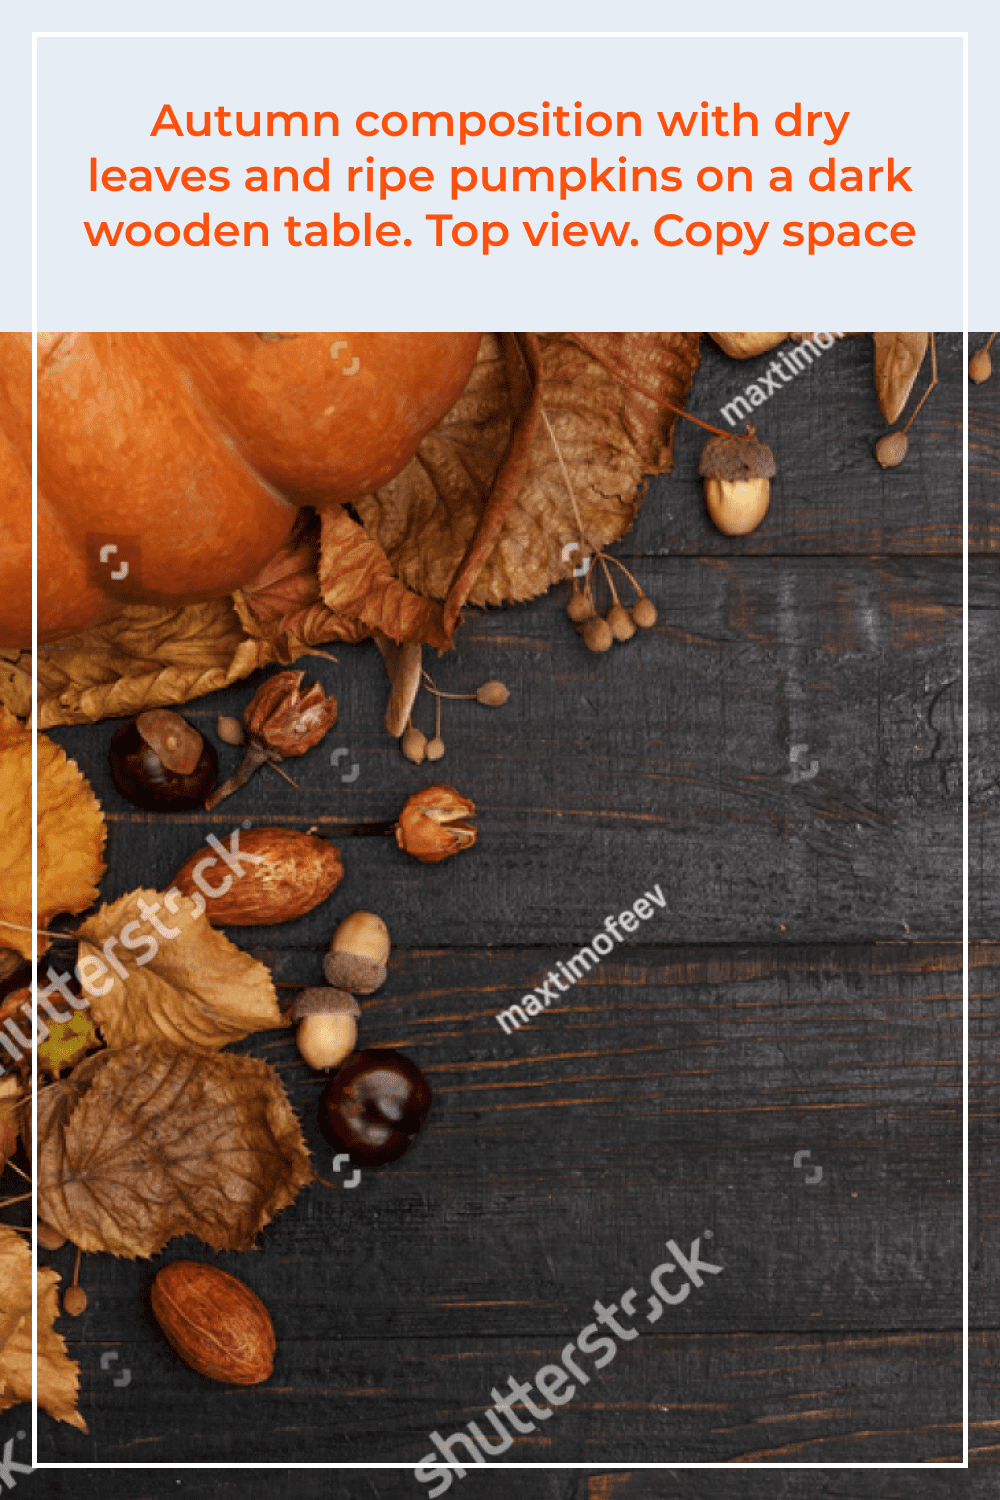 Autumn composition with dry leaves and ripe pumpkins on a dark wooden table.